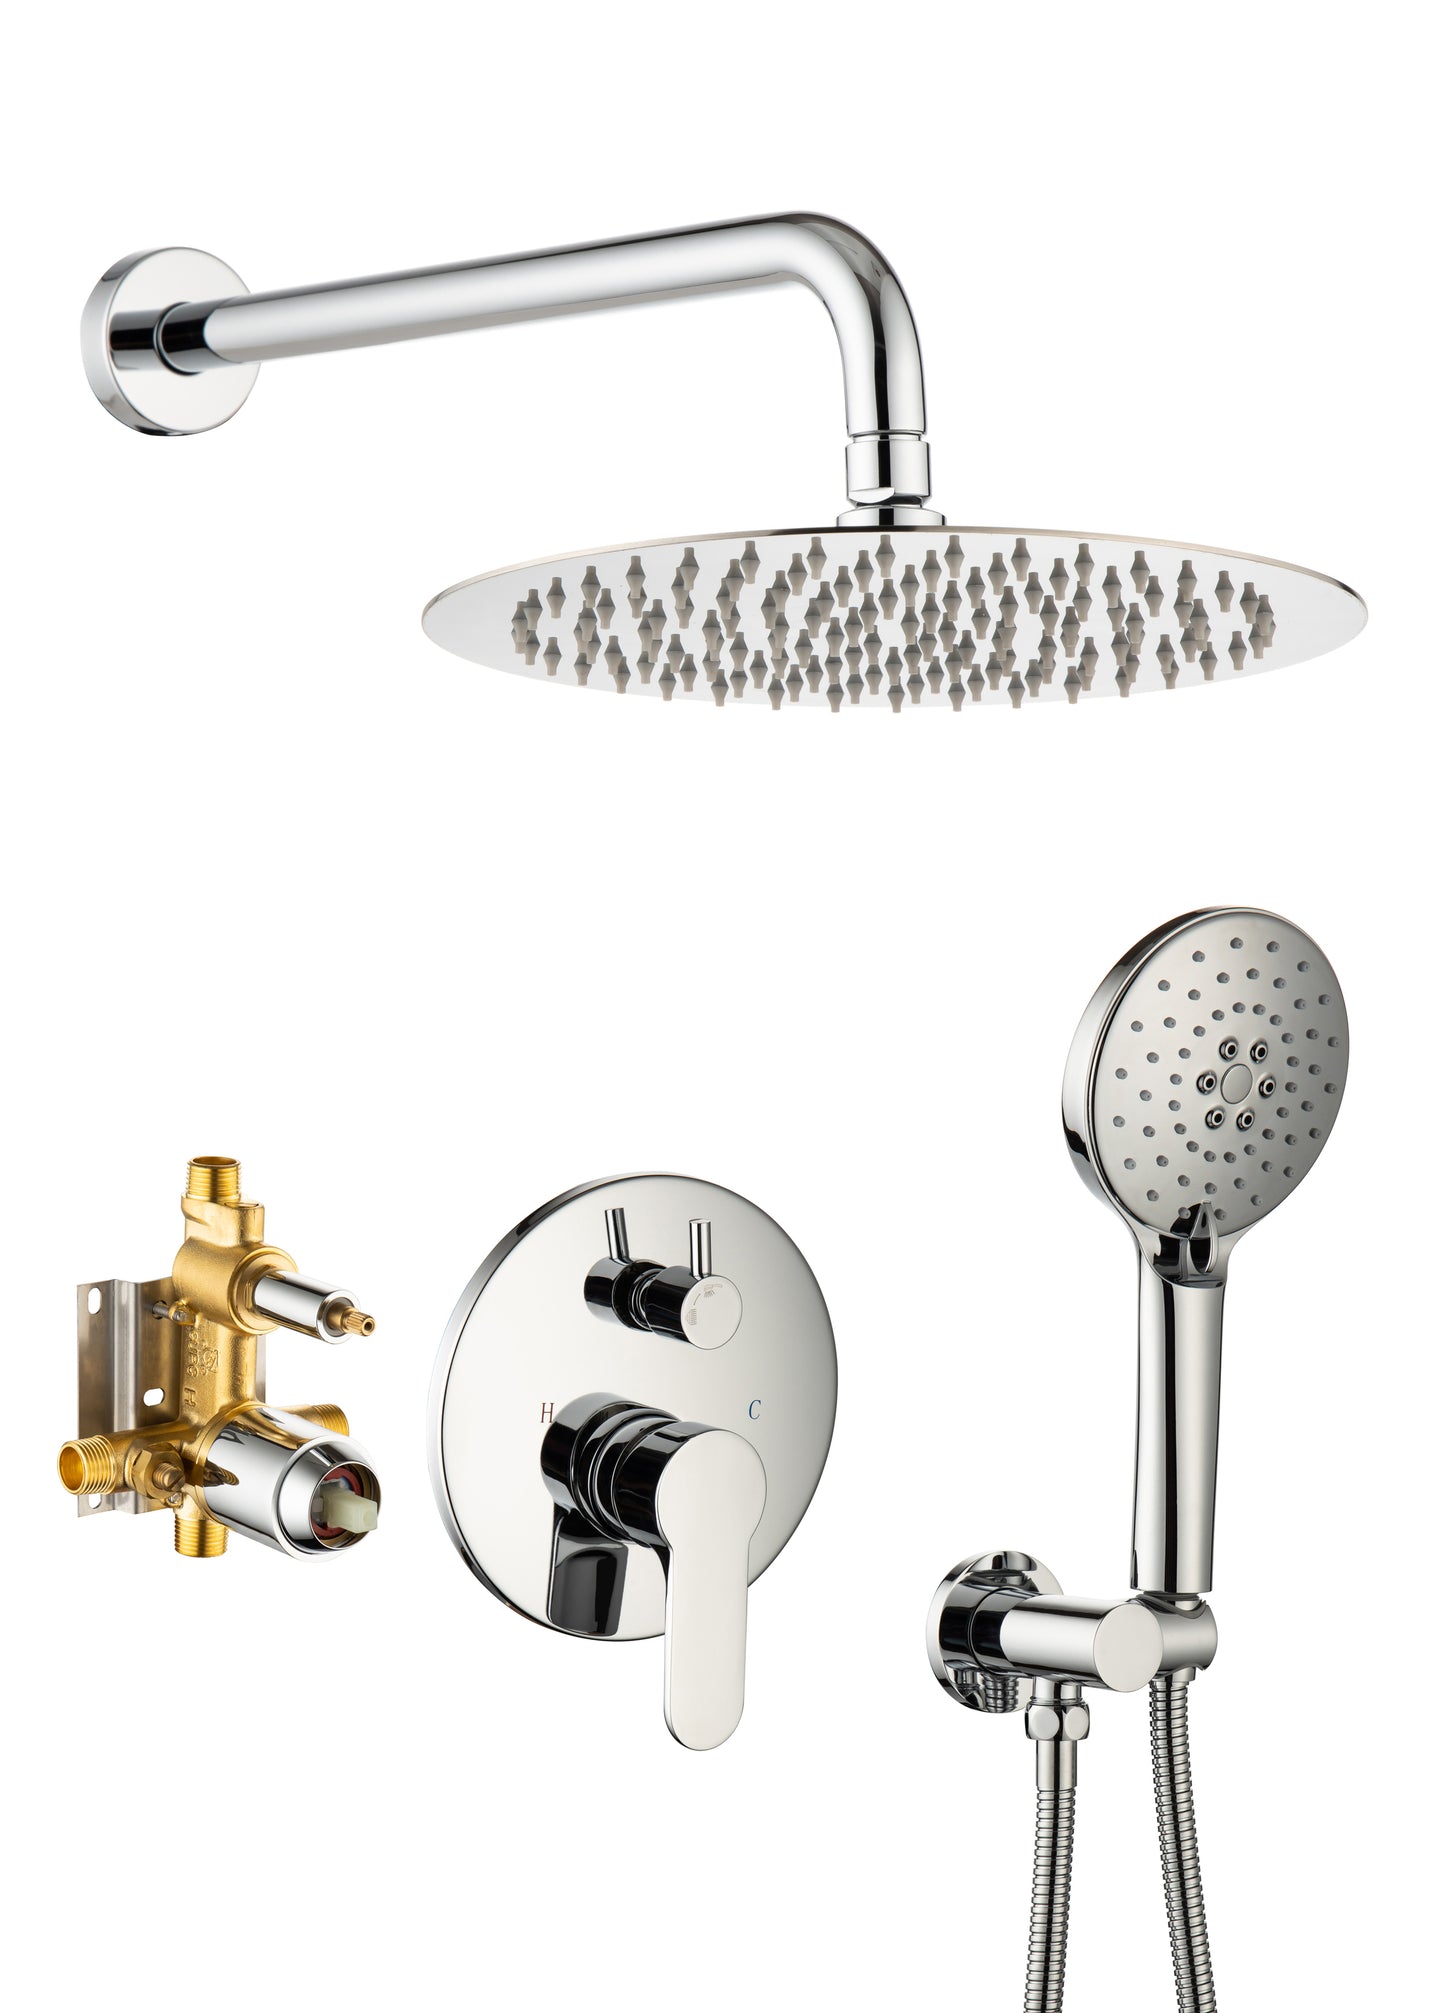 Shower Faucet Set, Wall Mount Round hower System Mixer Set, 10 Inch Rain Shower Head with Handheld Spray, Solid Brass, Rough-in Valve Included